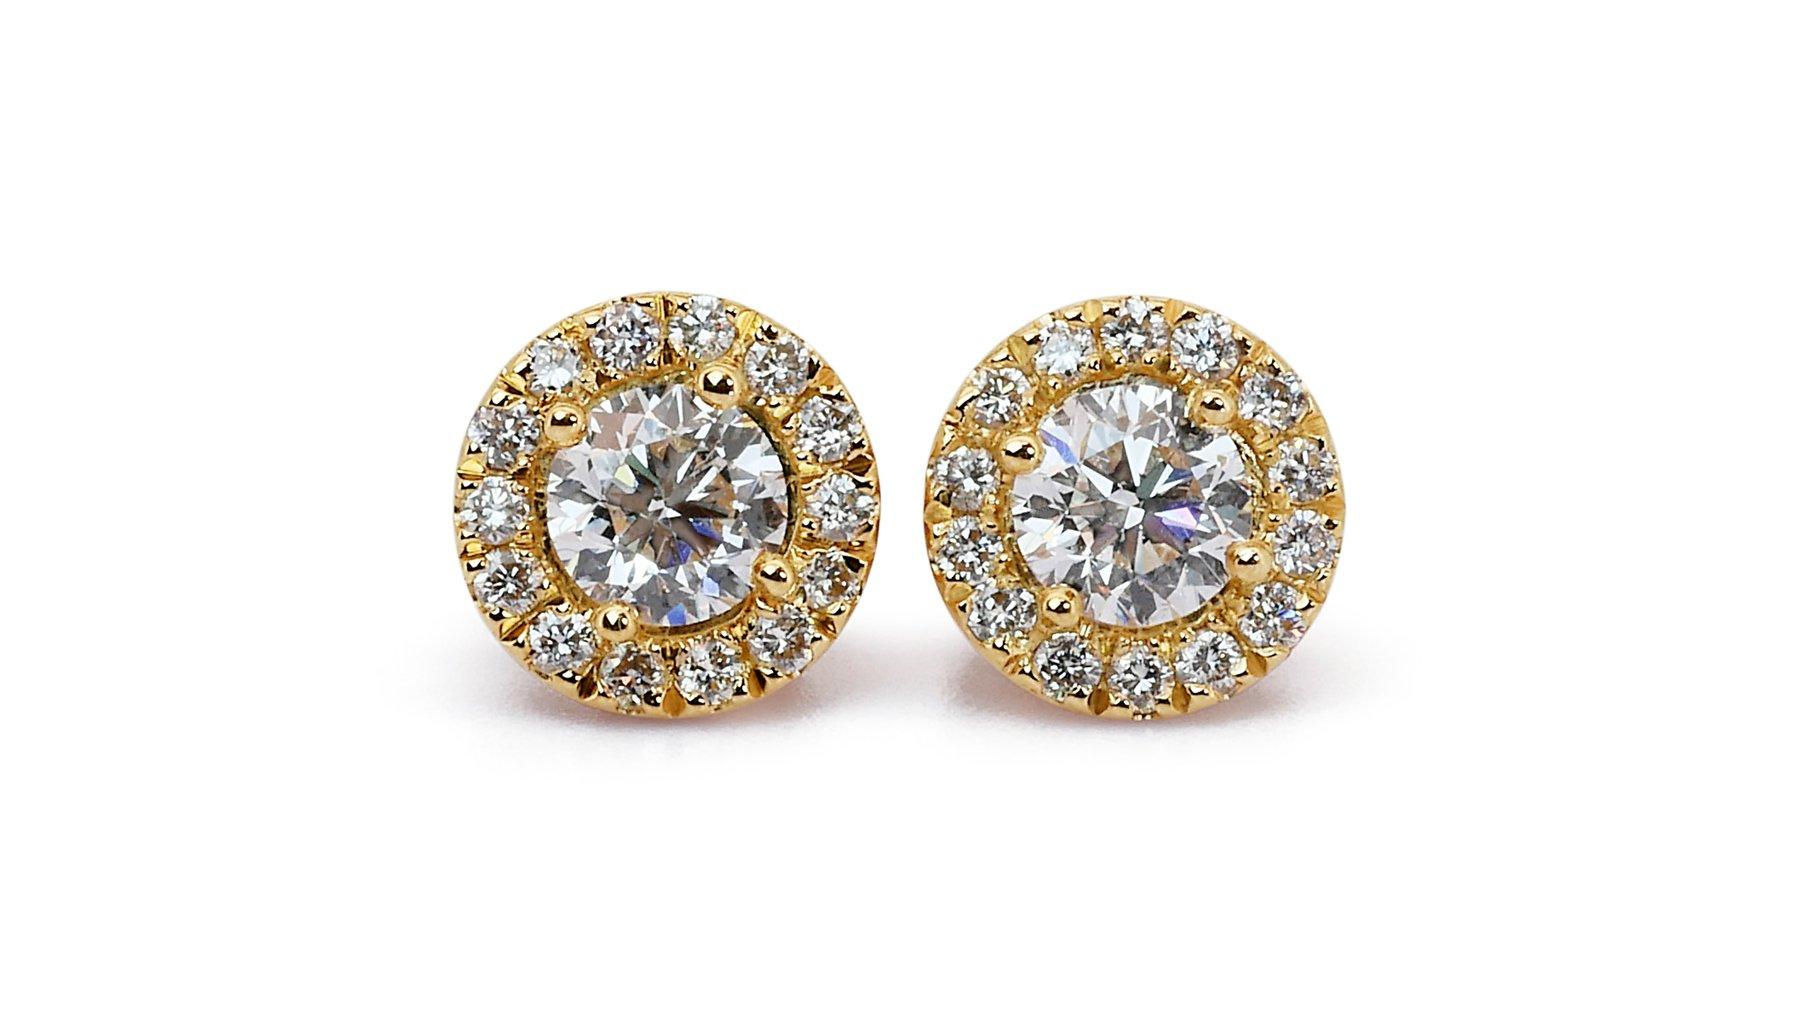 Elegant 18 kt. Yellow Gold Earrings with 1.5 ct Natural Diamond GIA Certificate 4